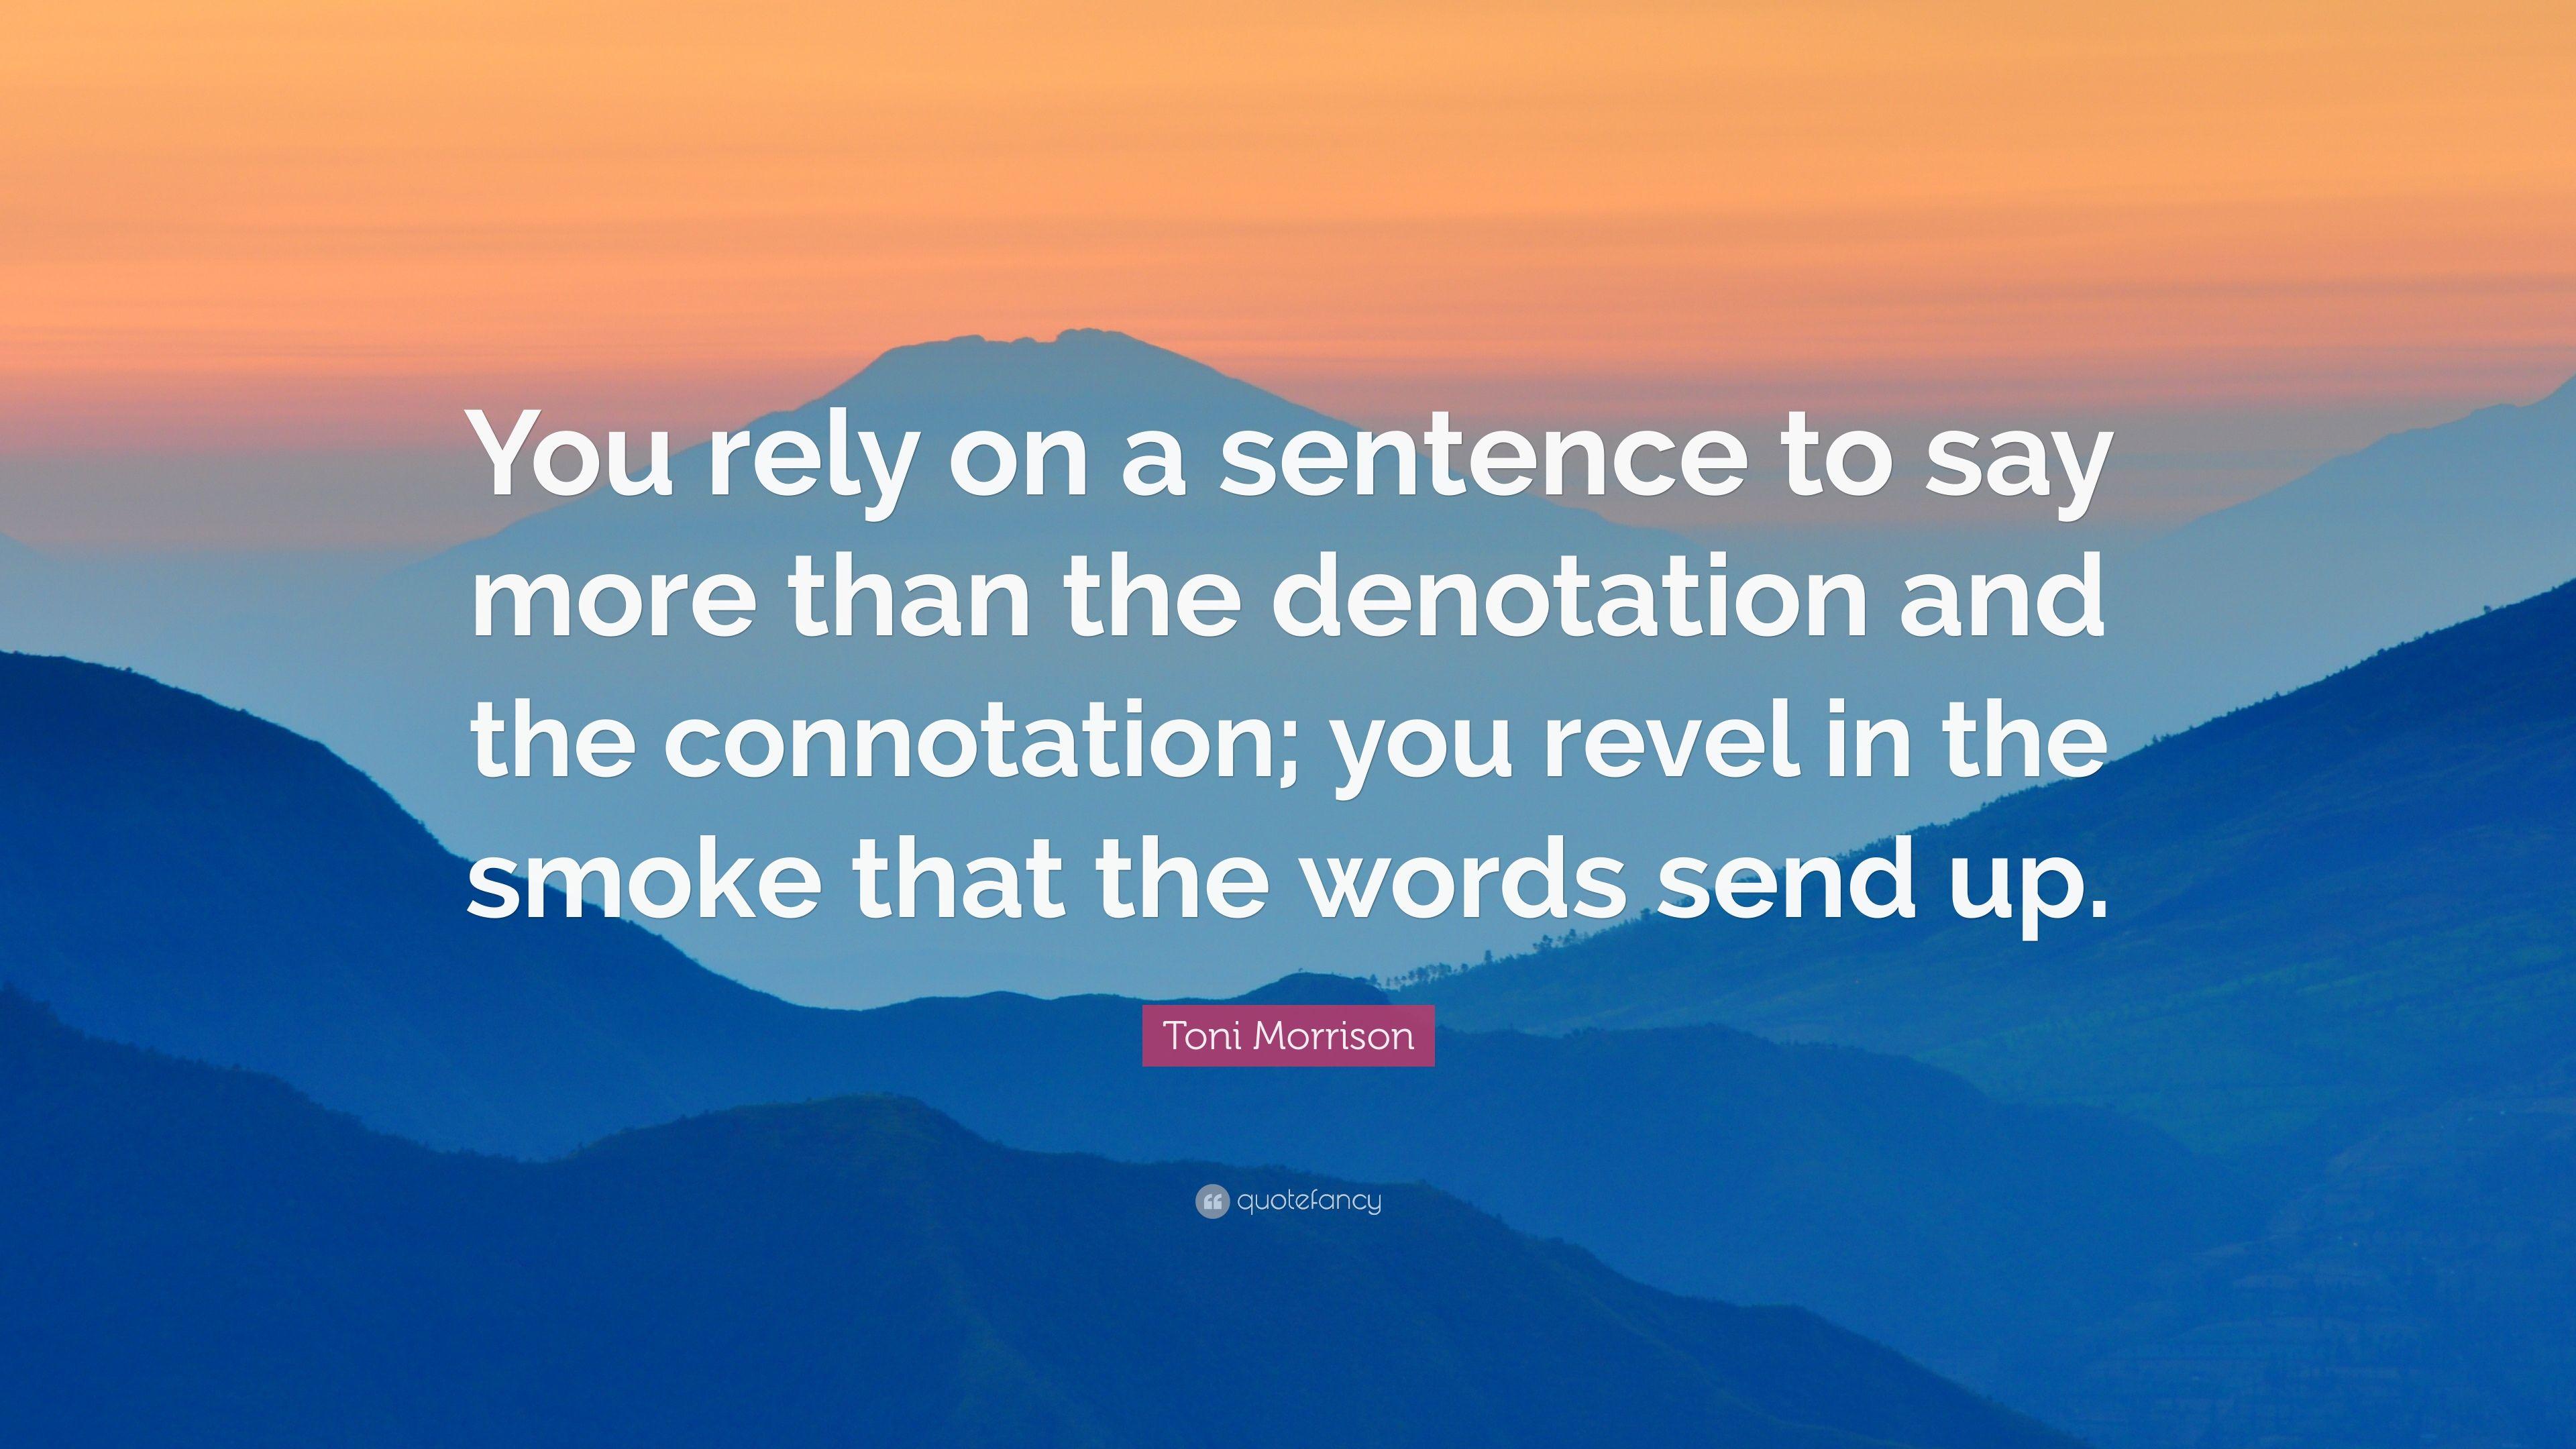 Toni Morrison Quote: “You rely on a sentence to say more than